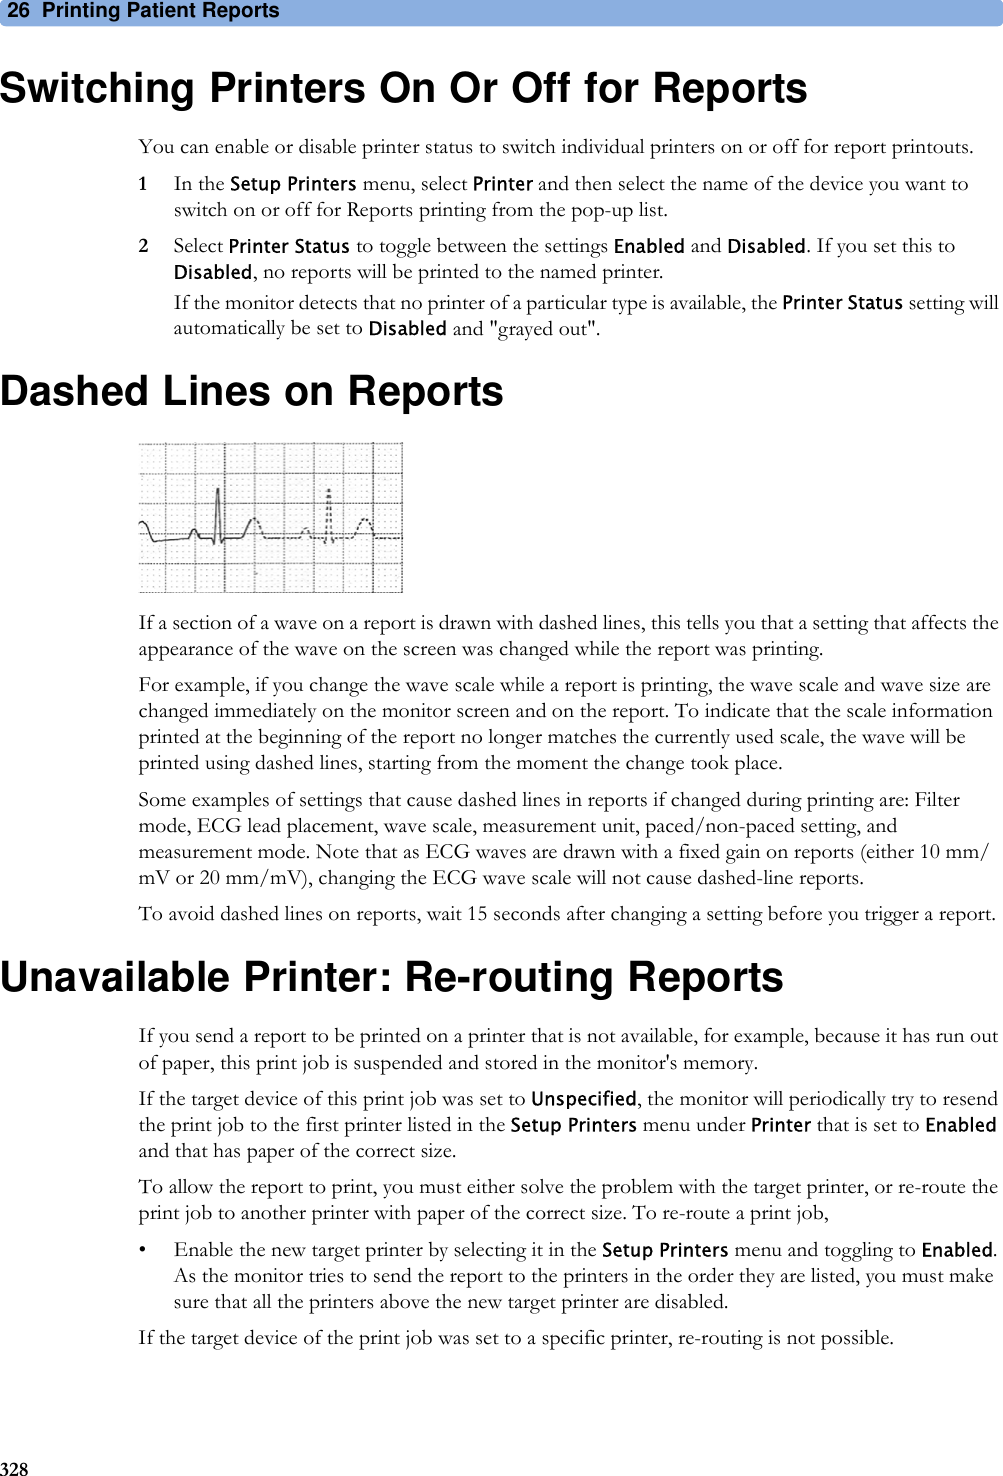 26 Printing Patient Reports328Switching Printers On Or Off for ReportsYou can enable or disable printer status to switch individual printers on or off for report printouts.1In the Setup Printers menu, select Printer and then select the name of the device you want to switch on or off for Reports printing from the pop-up list.2Select Printer Status to toggle between the settings Enabled and Disabled. If you set this to Disabled, no reports will be printed to the named printer.If the monitor detects that no printer of a particular type is available, the Printer Status setting will automatically be set to Disabled and &quot;grayed out&quot;.Dashed Lines on ReportsIf a section of a wave on a report is drawn with dashed lines, this tells you that a setting that affects the appearance of the wave on the screen was changed while the report was printing.For example, if you change the wave scale while a report is printing, the wave scale and wave size are changed immediately on the monitor screen and on the report. To indicate that the scale information printed at the beginning of the report no longer matches the currently used scale, the wave will be printed using dashed lines, starting from the moment the change took place.Some examples of settings that cause dashed lines in reports if changed during printing are: Filter mode, ECG lead placement, wave scale, measurement unit, paced/non-paced setting, and measurement mode. Note that as ECG waves are drawn with a fixed gain on reports (either 10 mm/mV or 20 mm/mV), changing the ECG wave scale will not cause dashed-line reports.To avoid dashed lines on reports, wait 15 seconds after changing a setting before you trigger a report.Unavailable Printer: Re-routing ReportsIf you send a report to be printed on a printer that is not available, for example, because it has run out of paper, this print job is suspended and stored in the monitor&apos;s memory.If the target device of this print job was set to Unspecified, the monitor will periodically try to resend the print job to the first printer listed in the Setup Printers menu under Printer that is set to Enabled and that has paper of the correct size.To allow the report to print, you must either solve the problem with the target printer, or re-route the print job to another printer with paper of the correct size. To re-route a print job,• Enable the new target printer by selecting it in the Setup Printers menu and toggling to Enabled. As the monitor tries to send the report to the printers in the order they are listed, you must make sure that all the printers above the new target printer are disabled.If the target device of the print job was set to a specific printer, re-routing is not possible.